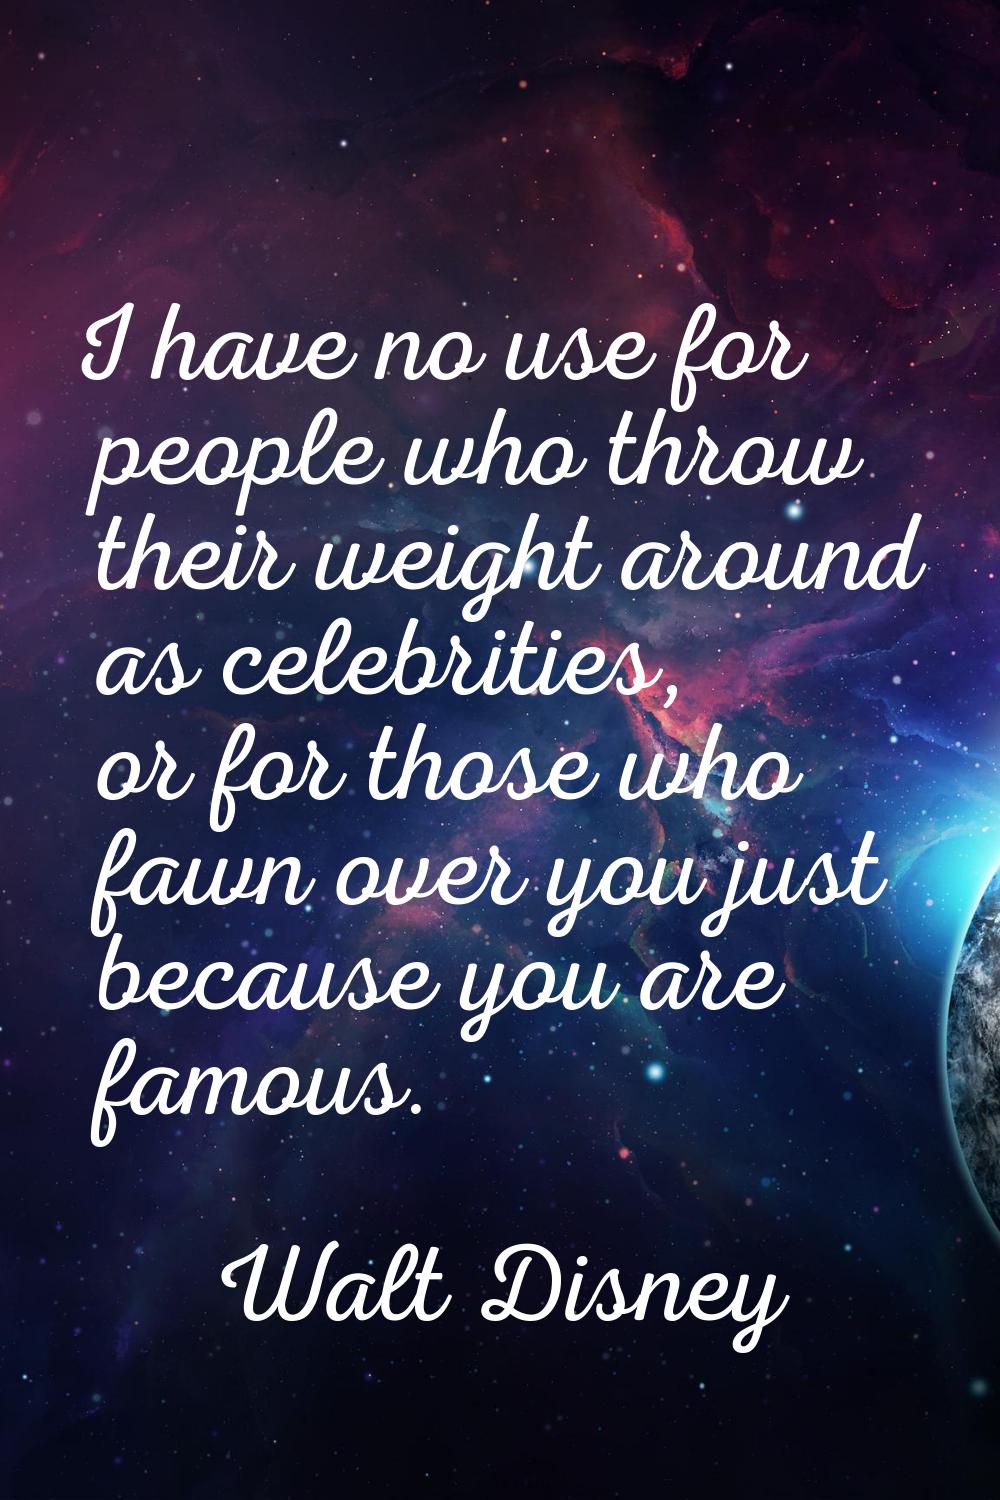 I have no use for people who throw their weight around as celebrities, or for those who fawn over y